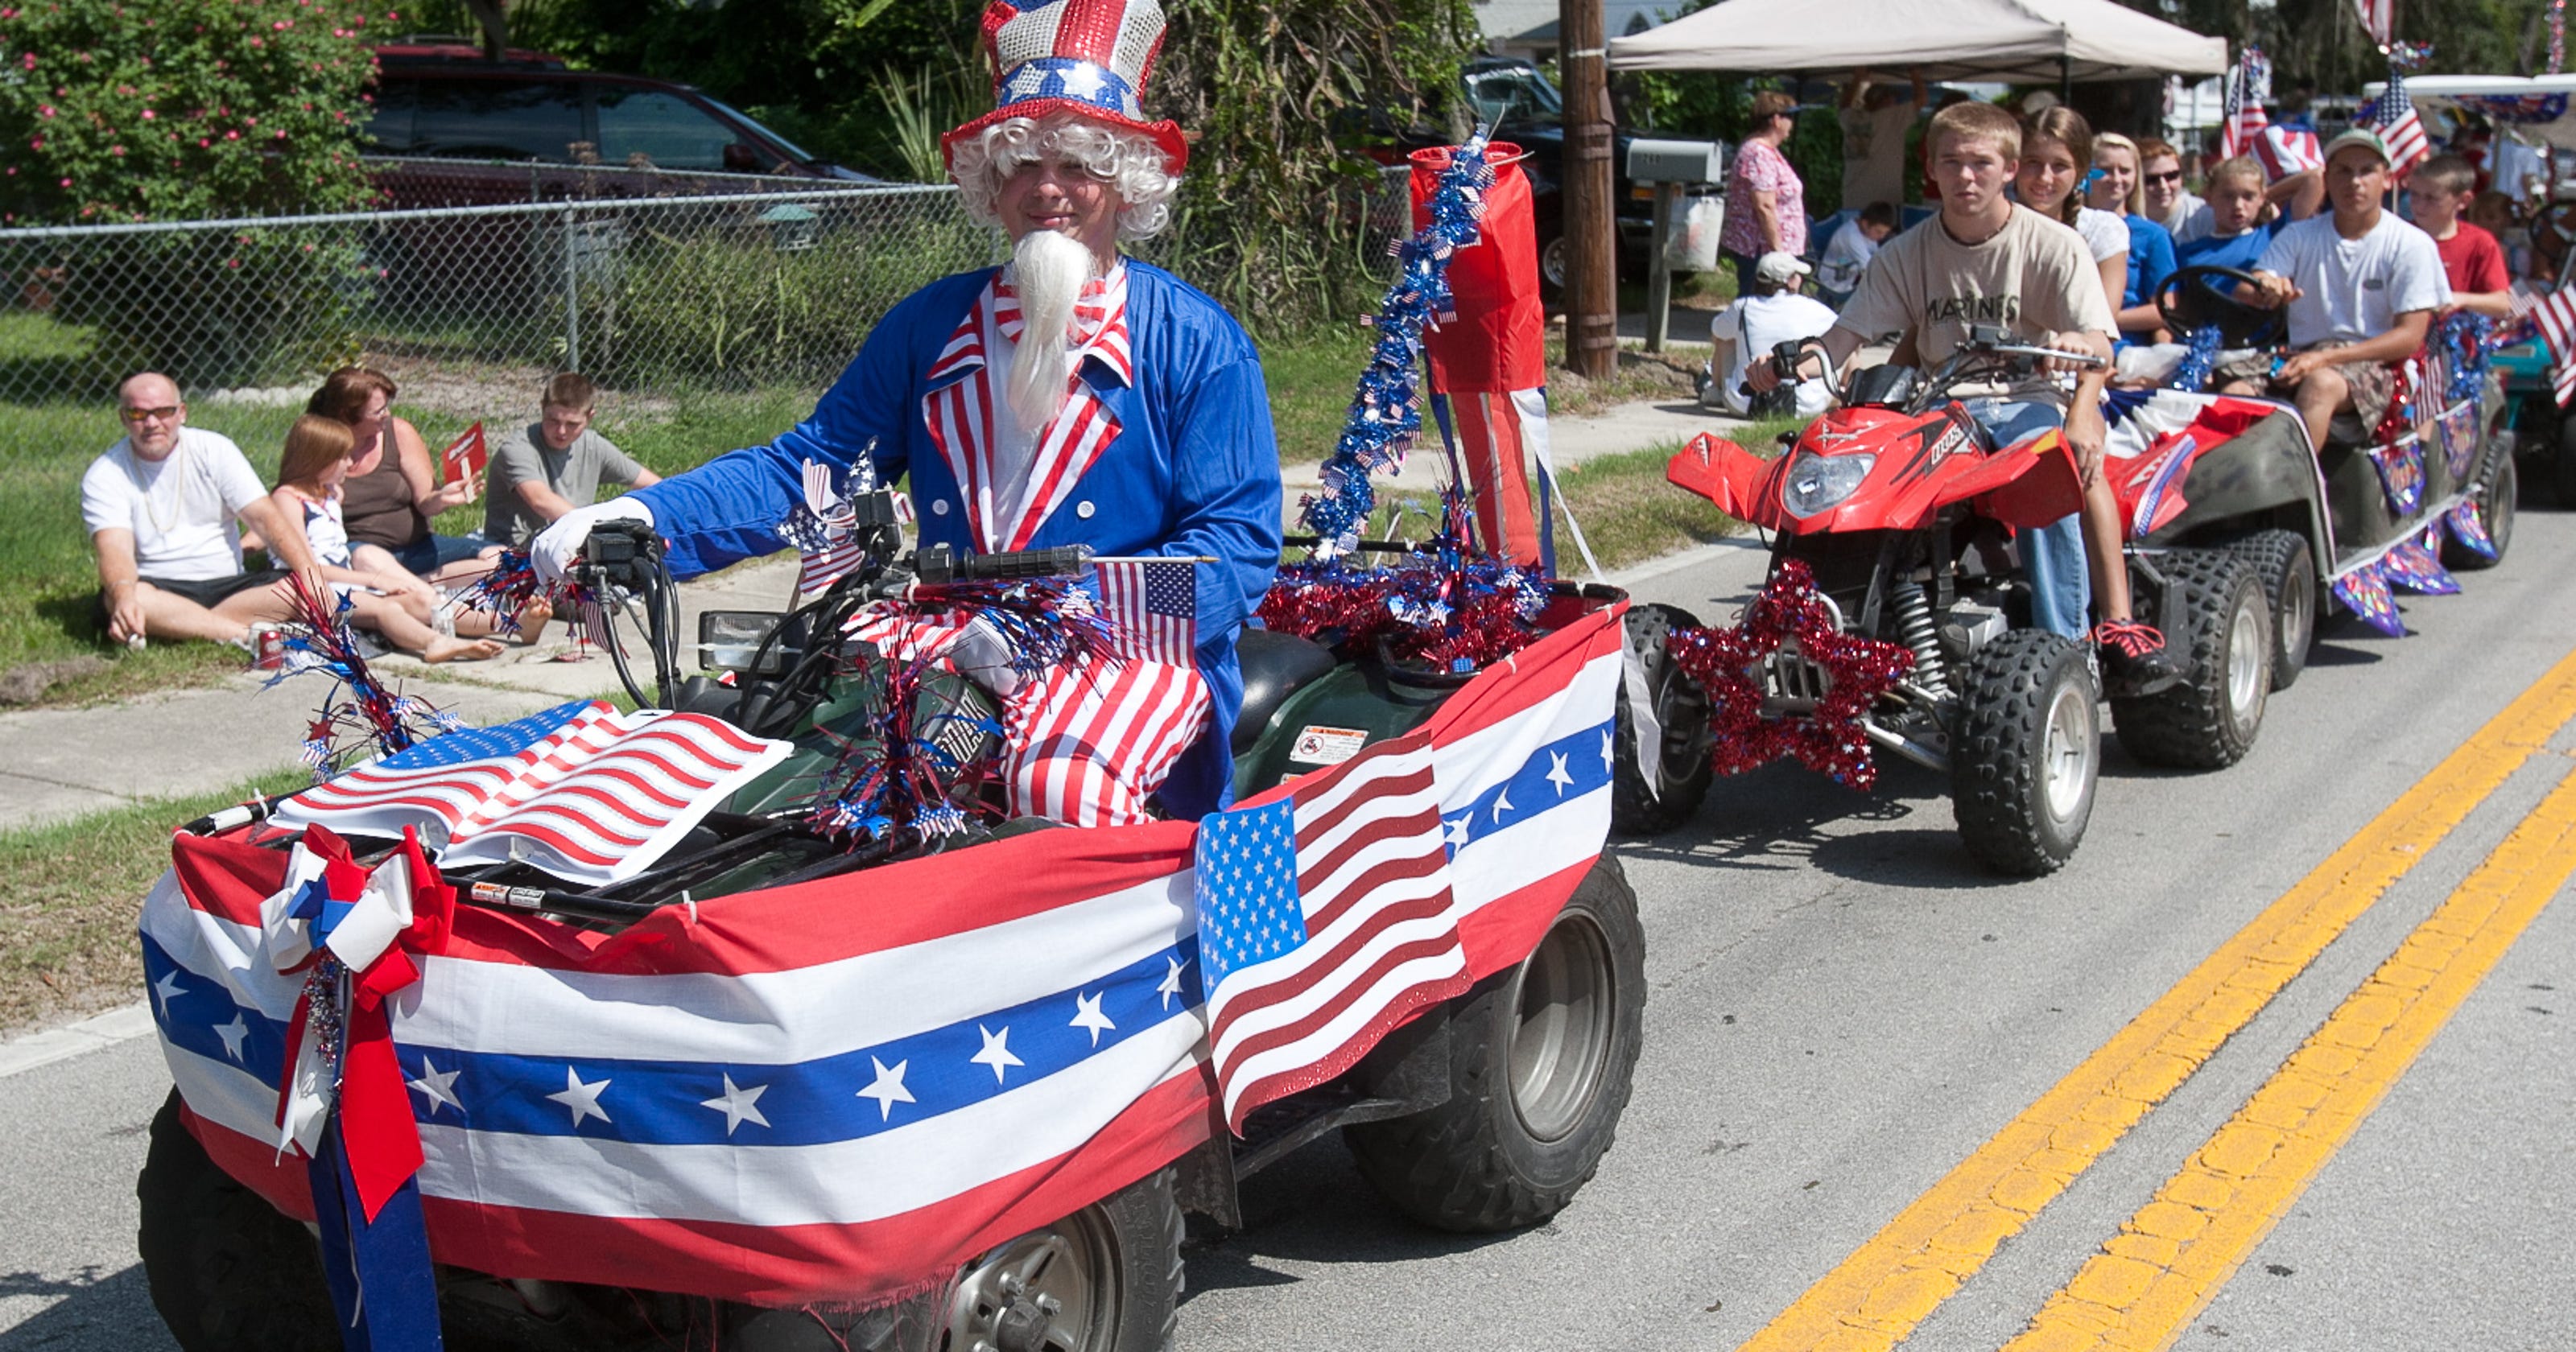 July Fourth events in Central Florida